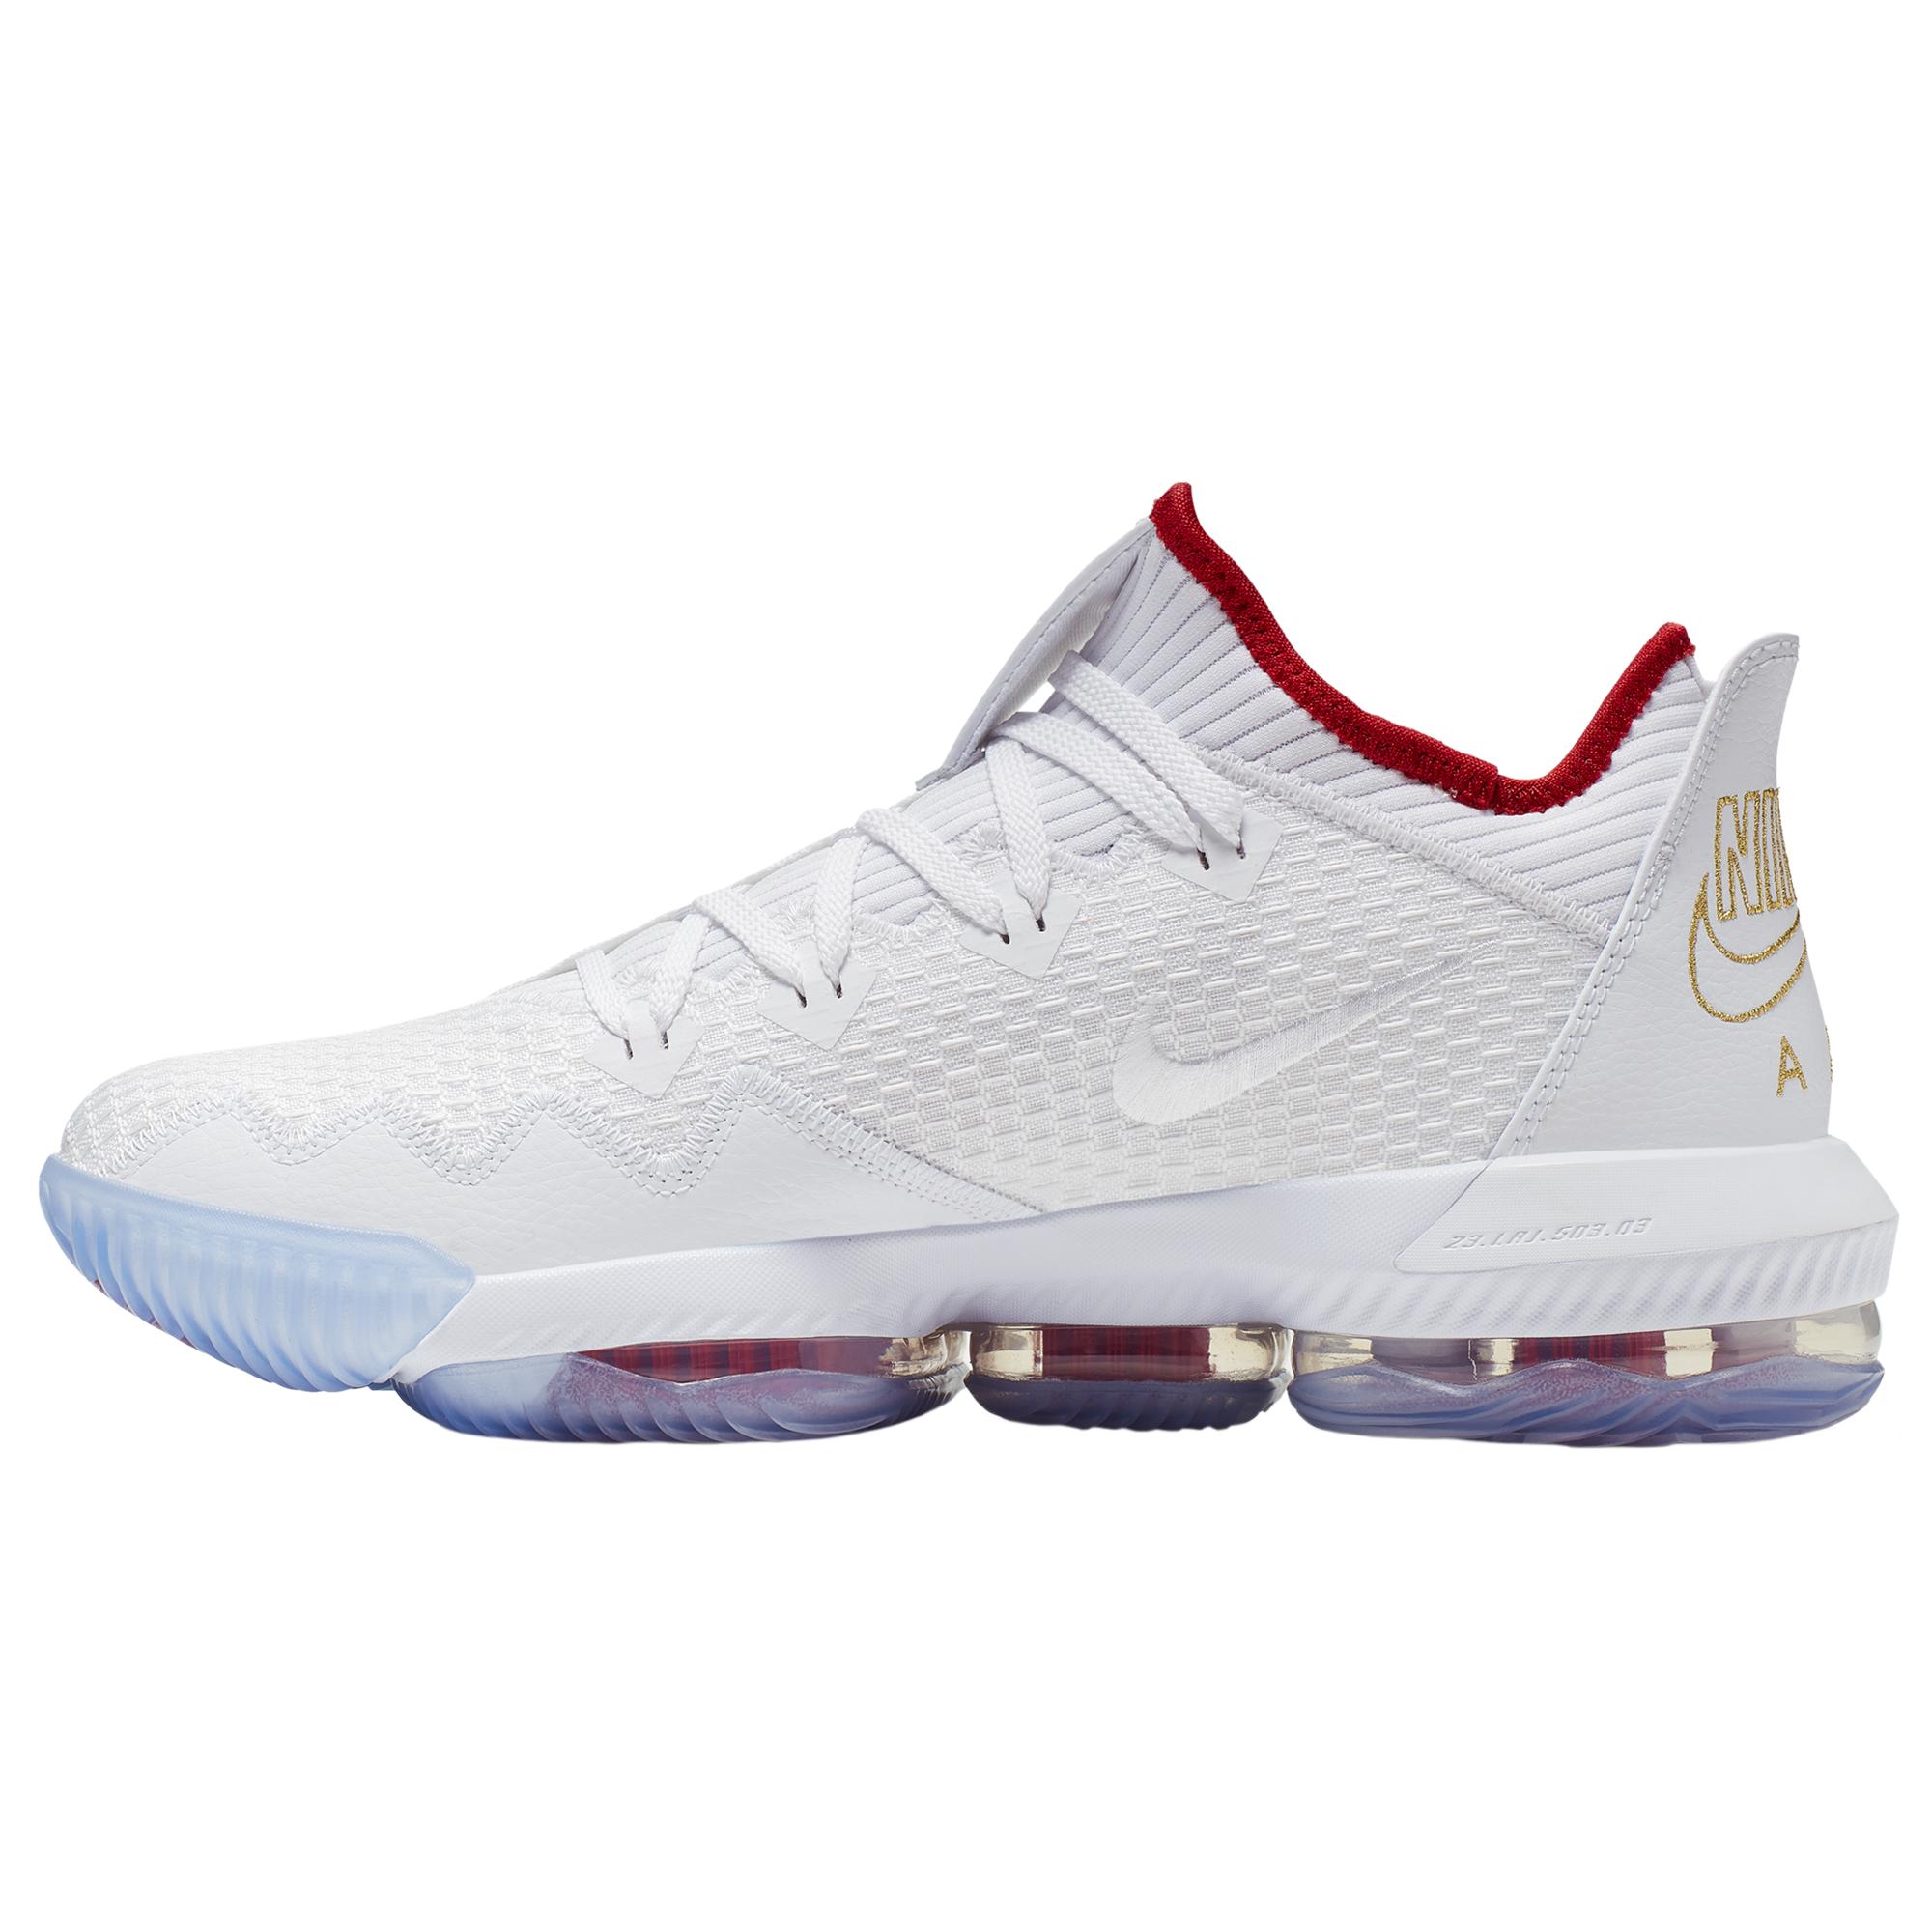 Nike Lebron 16 Low Basketball Shoes in 